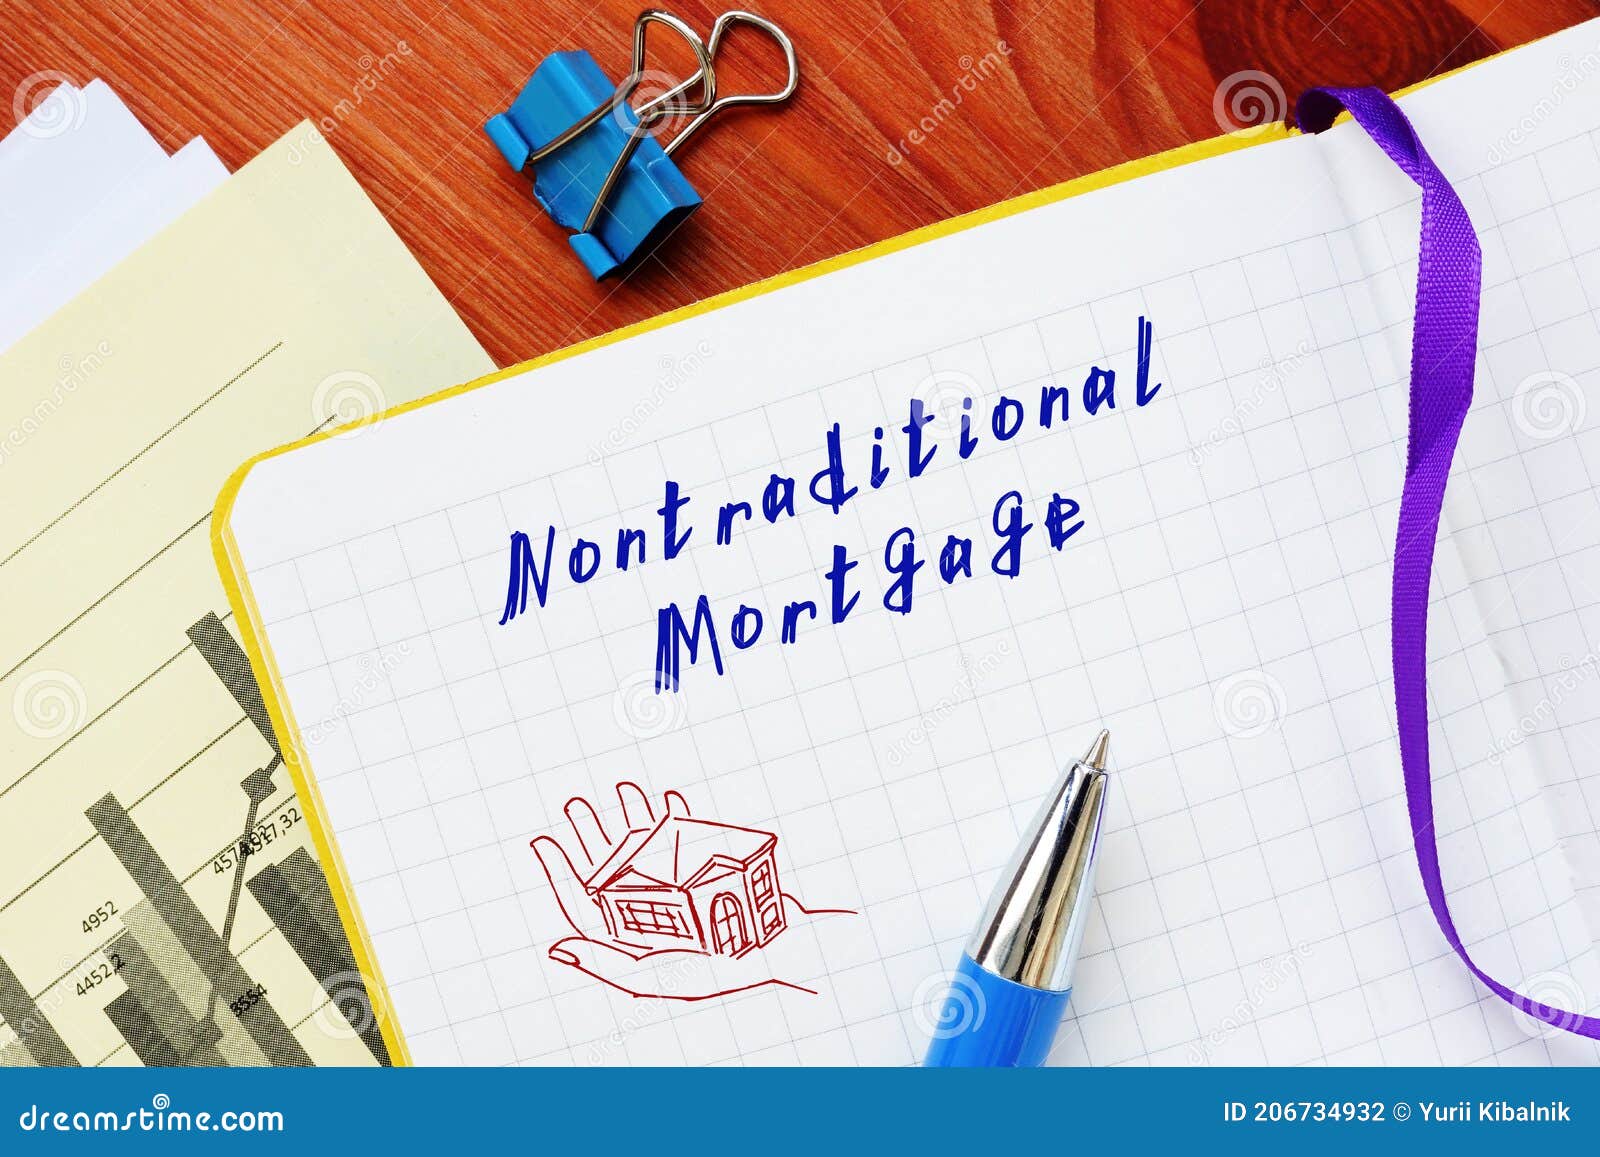 financial concept meaning nontraditional mortgage with phrase on the piece of paper